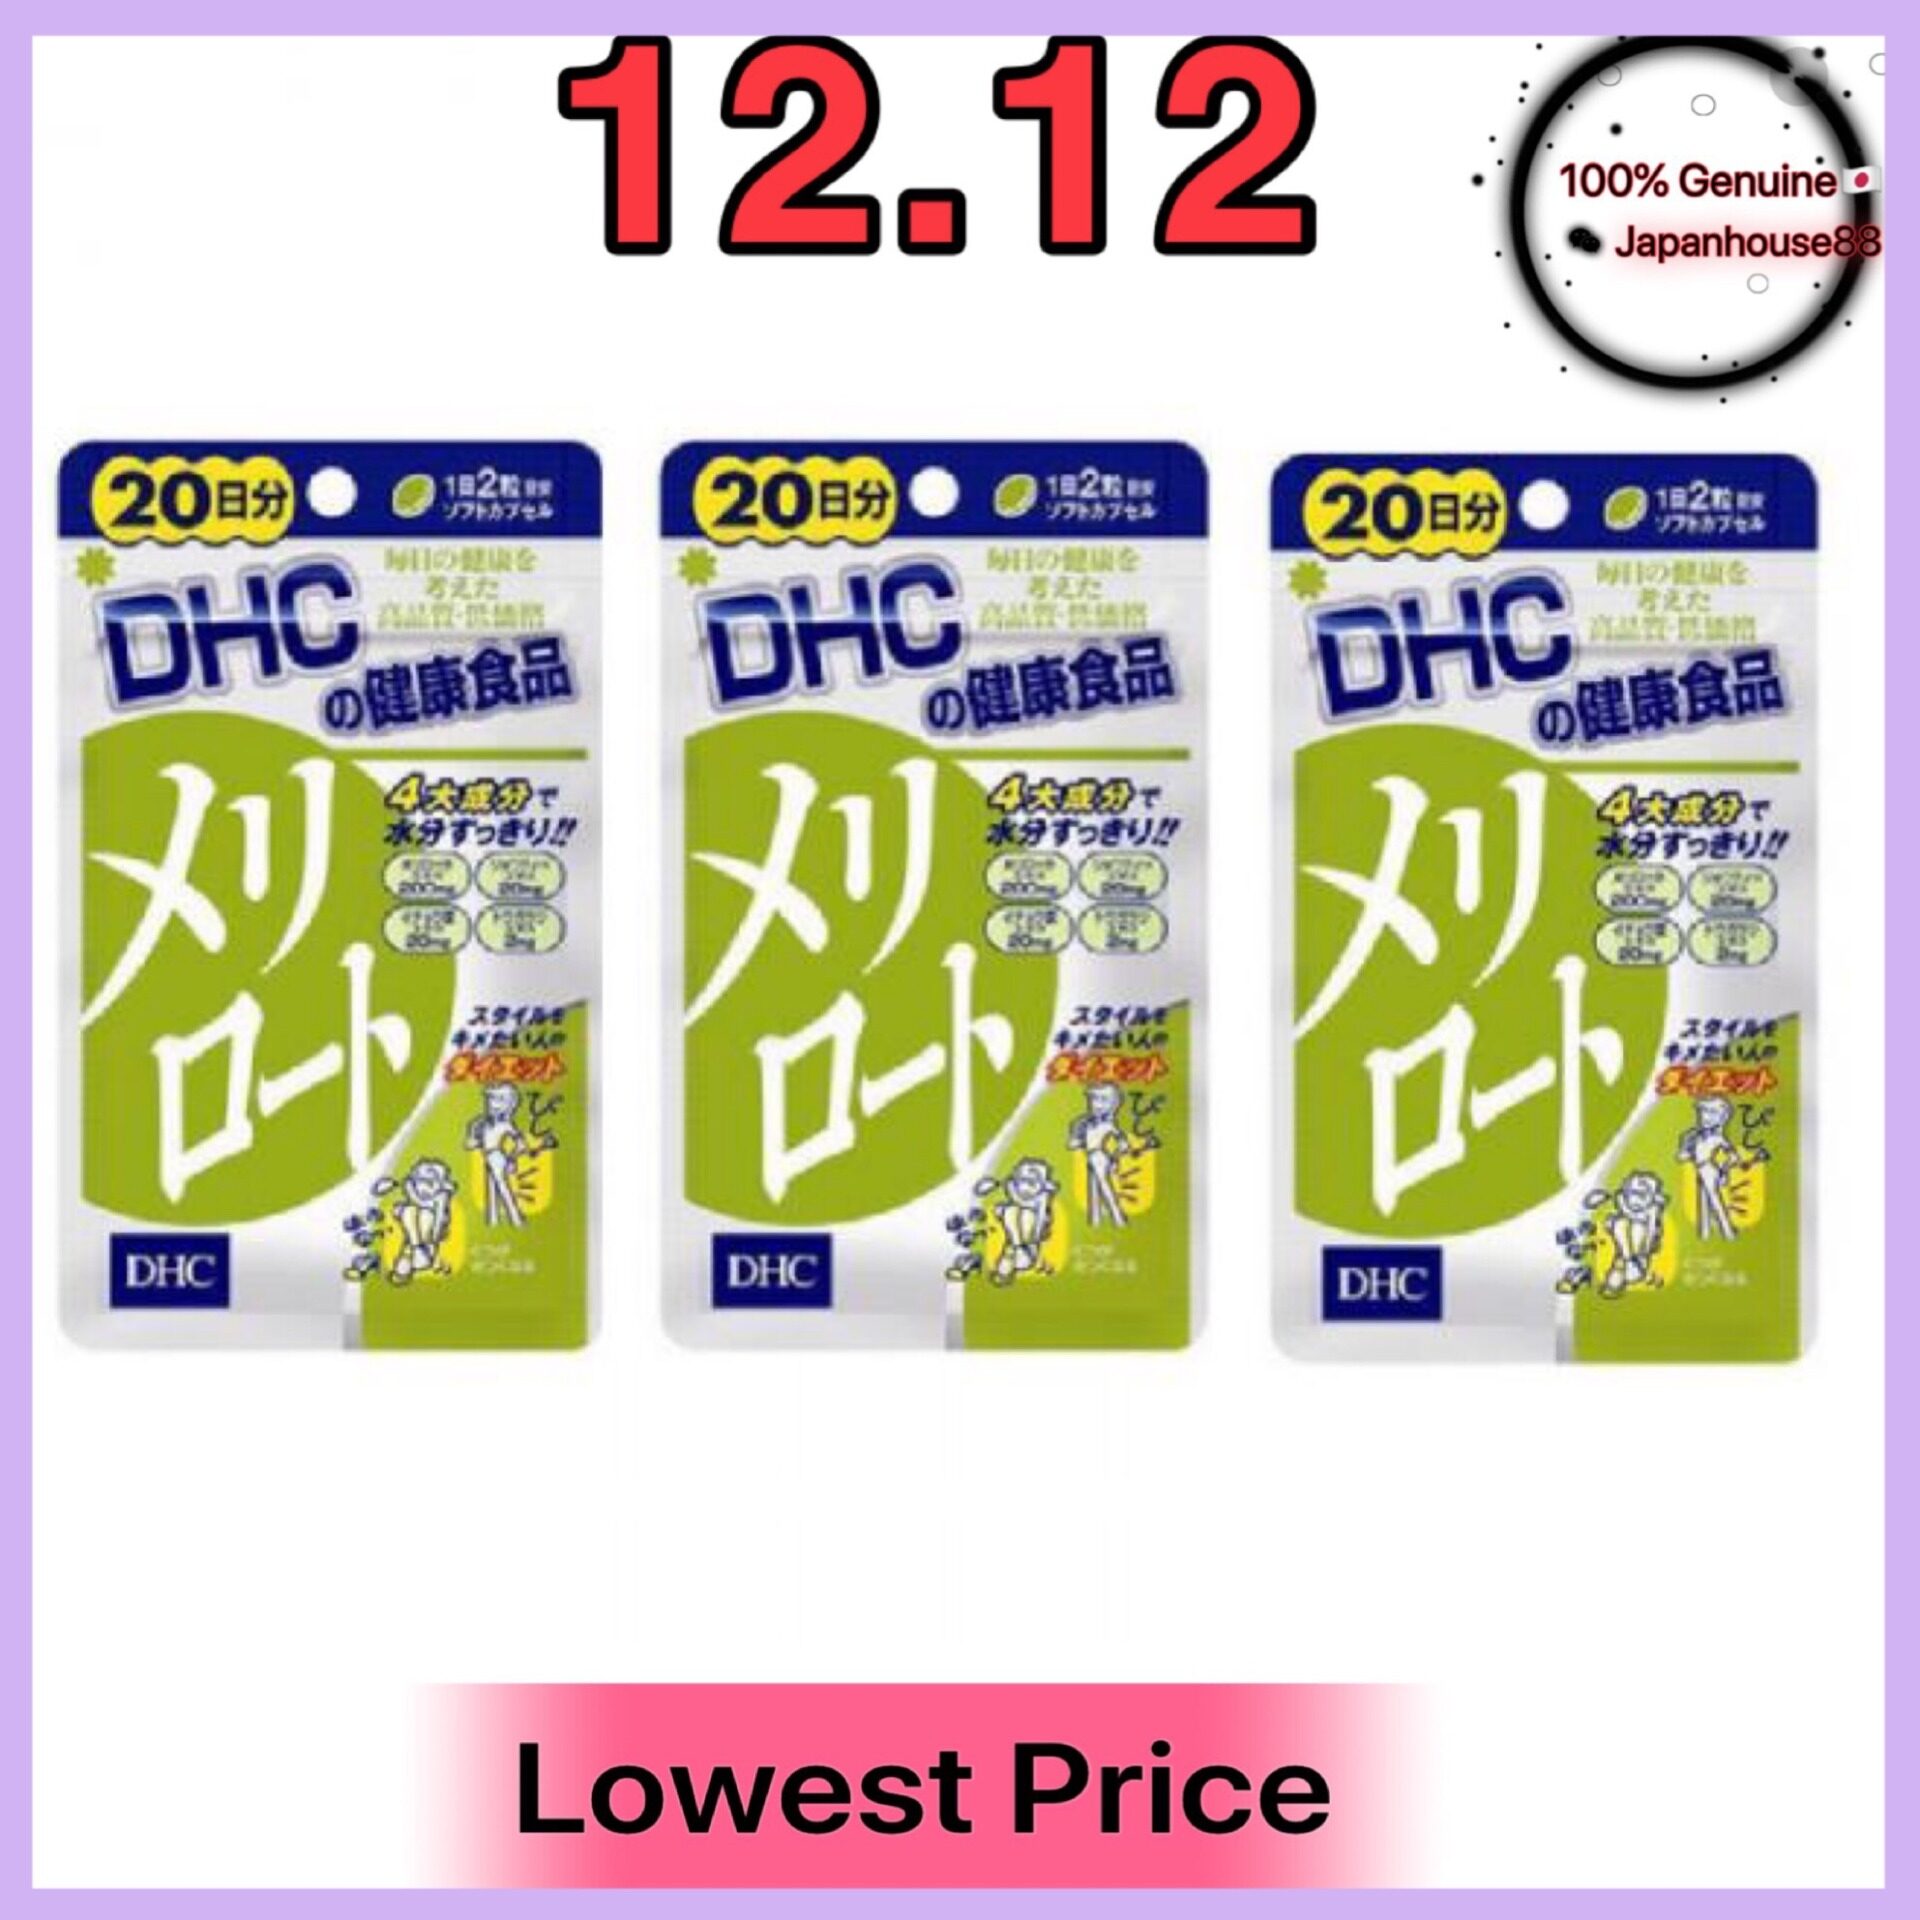 dhc leg slimming review)